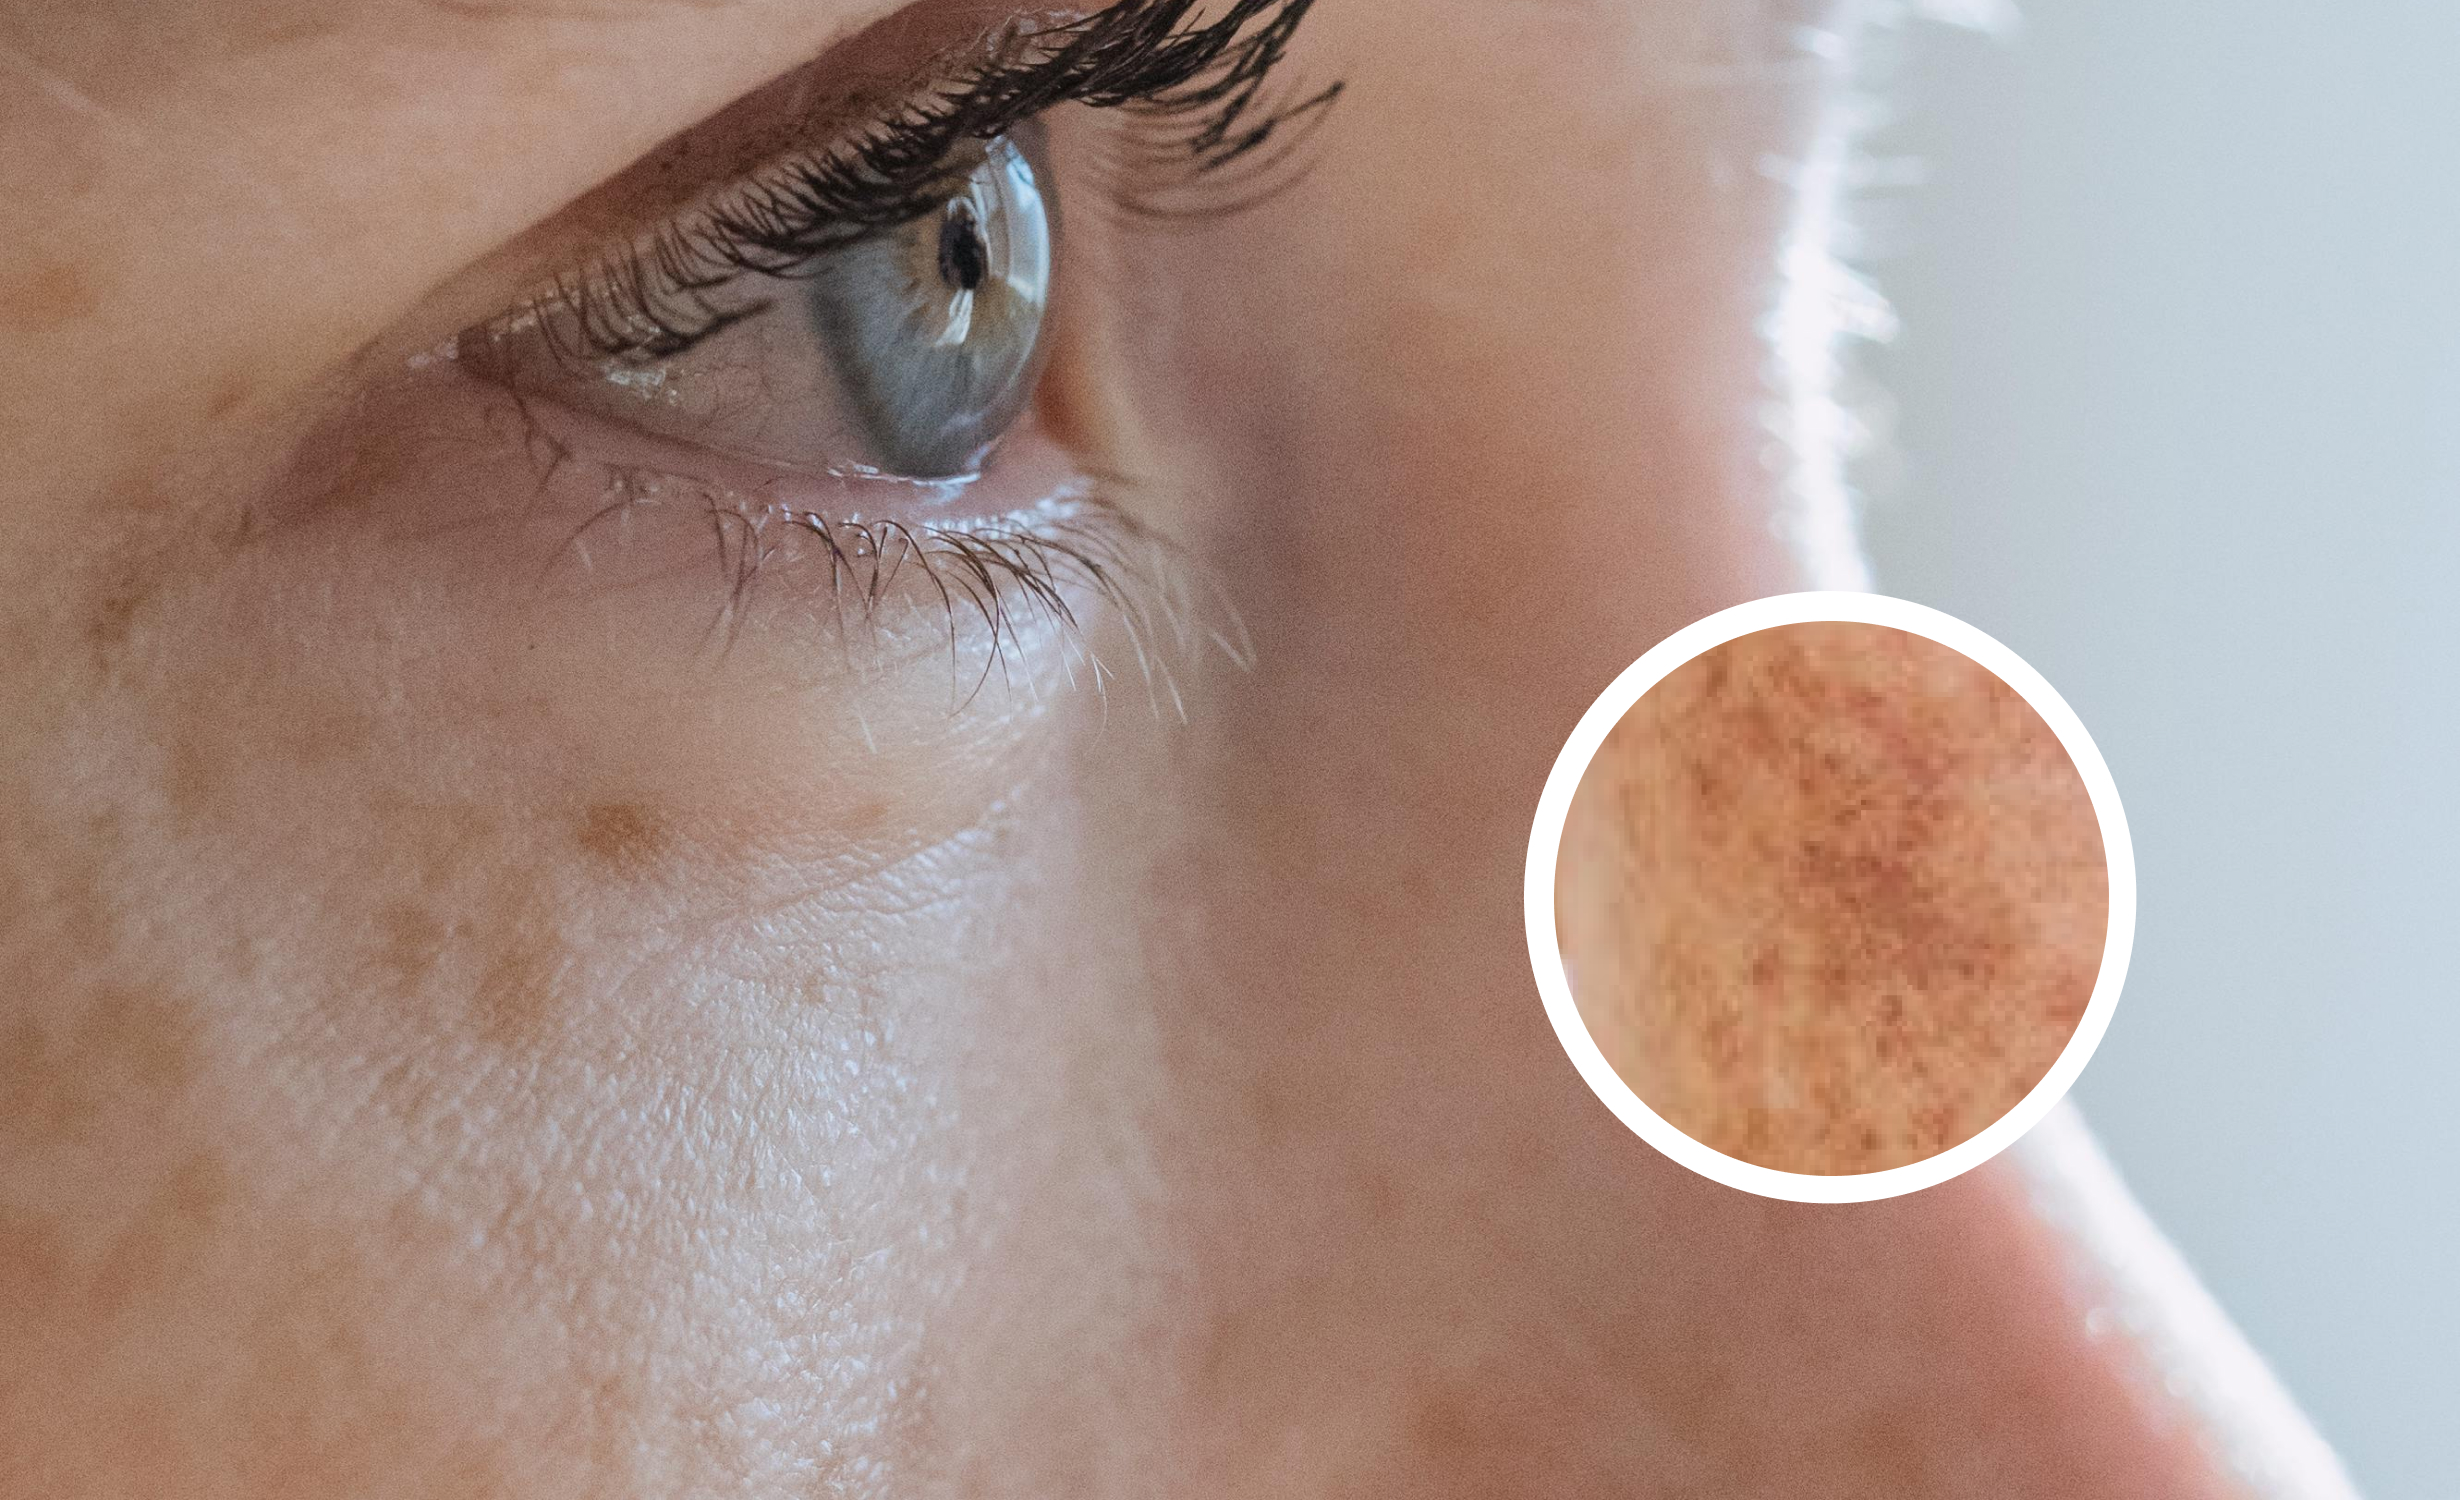 A close-up side view of a person’s eye, focusing on the skin around the eye area. There is visible pigmentation on the skin. An inset magnifies a section of the pigmented skin, highlighting the texture and color variations.